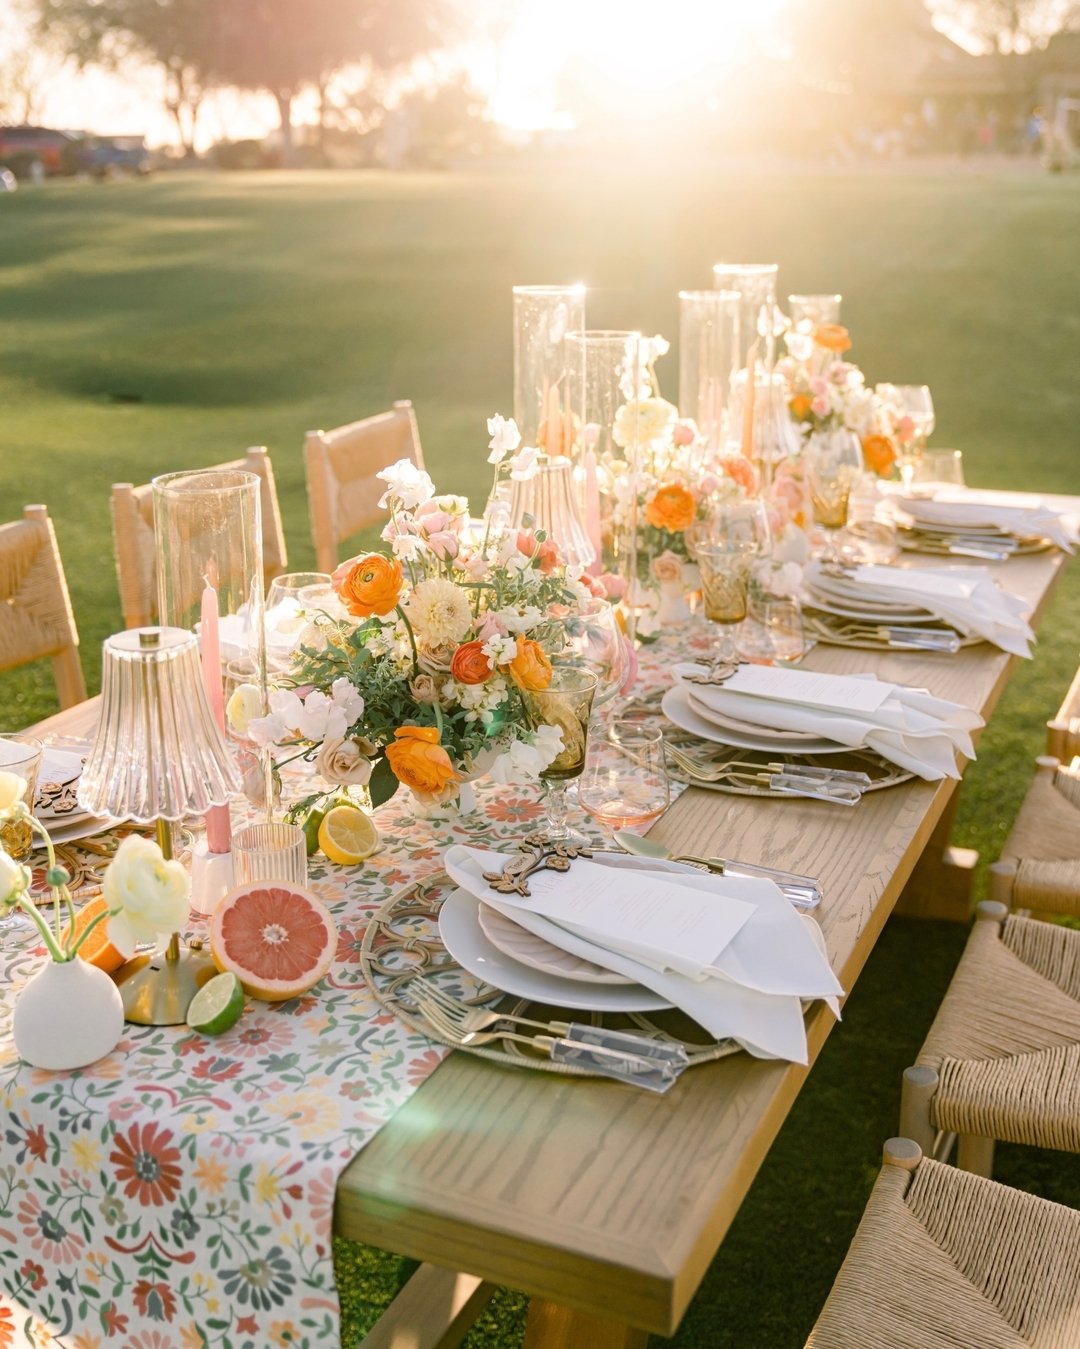 That Springtime glow☀️ with our new Hayden Dining table
&bull;
Planner: @shineeventsaz
Venue: @superstitionmtnweddings
Photographer: @megancaryphotography
Videography: @kylehustis
Floral Design: @floralsbykendra
&bull;
#primdesignco #eventrentals #re